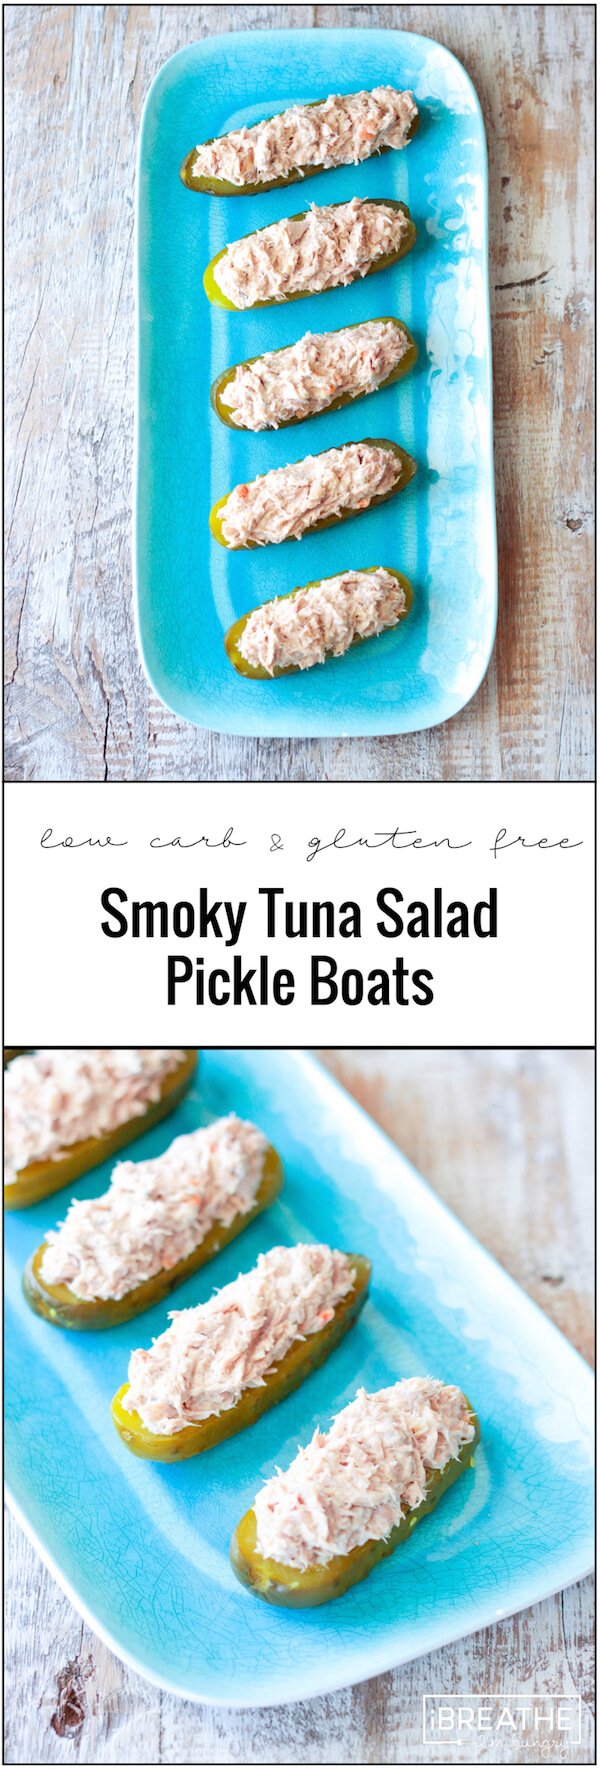 These smoky tuna salad pickle boats are the perfect keto friendly after school snack, or they even make a great low carb lunch on the go!